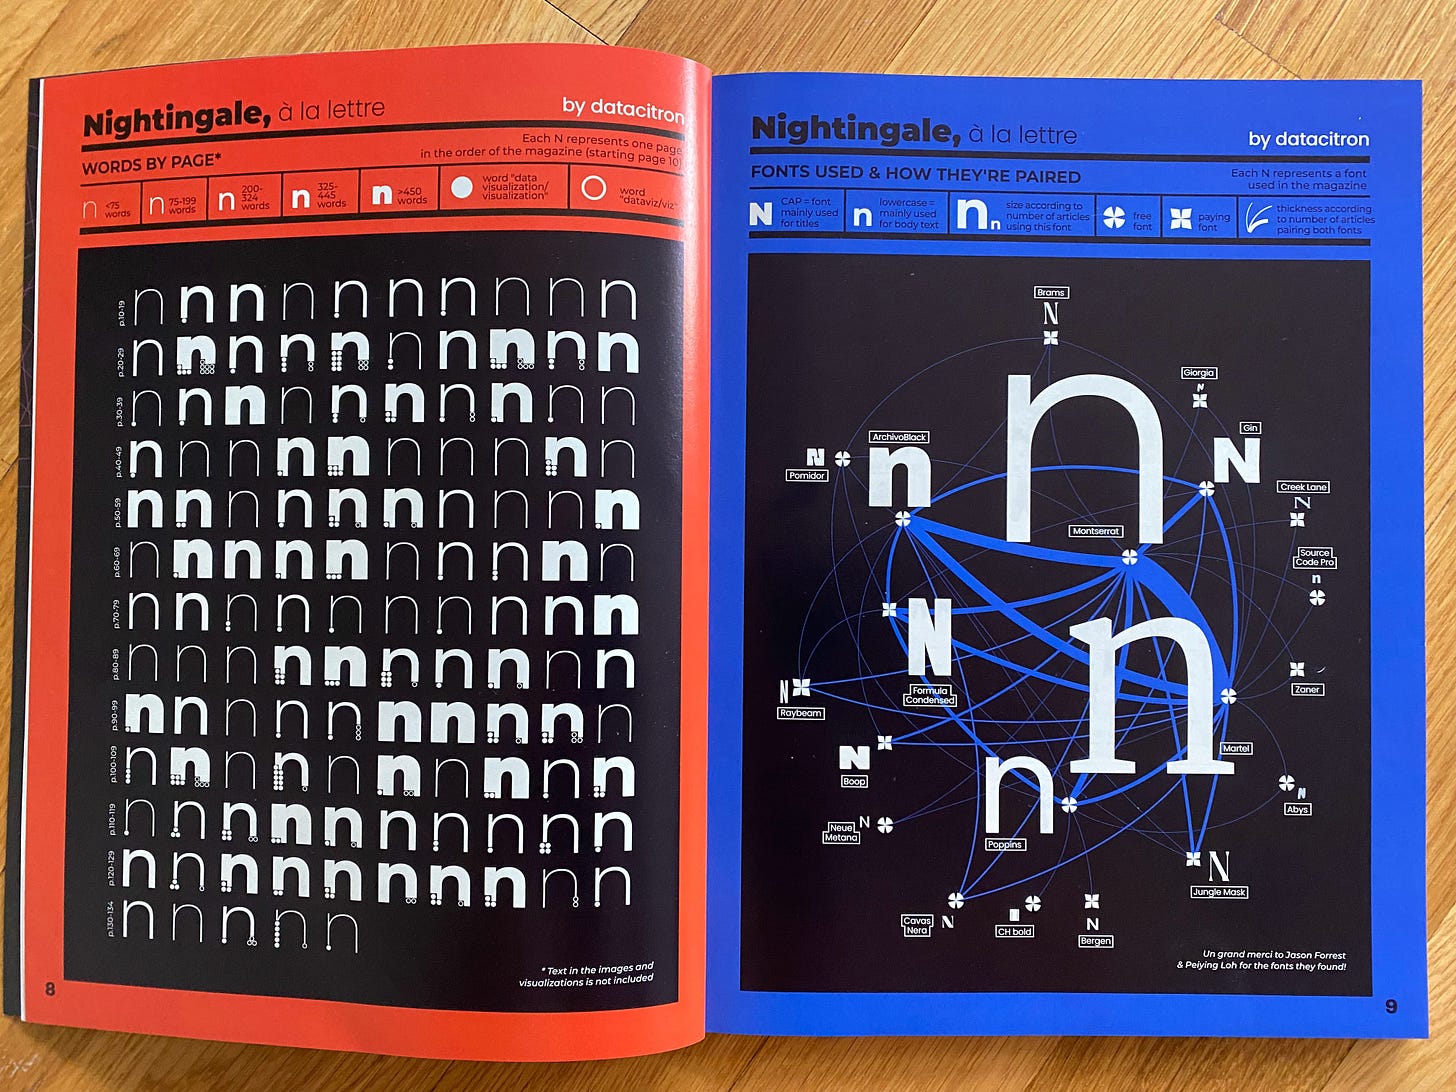 A double spread from the Nightingale magazine that contains a visual summary on the number of words per page and the fonts used throughout the whole magazine.